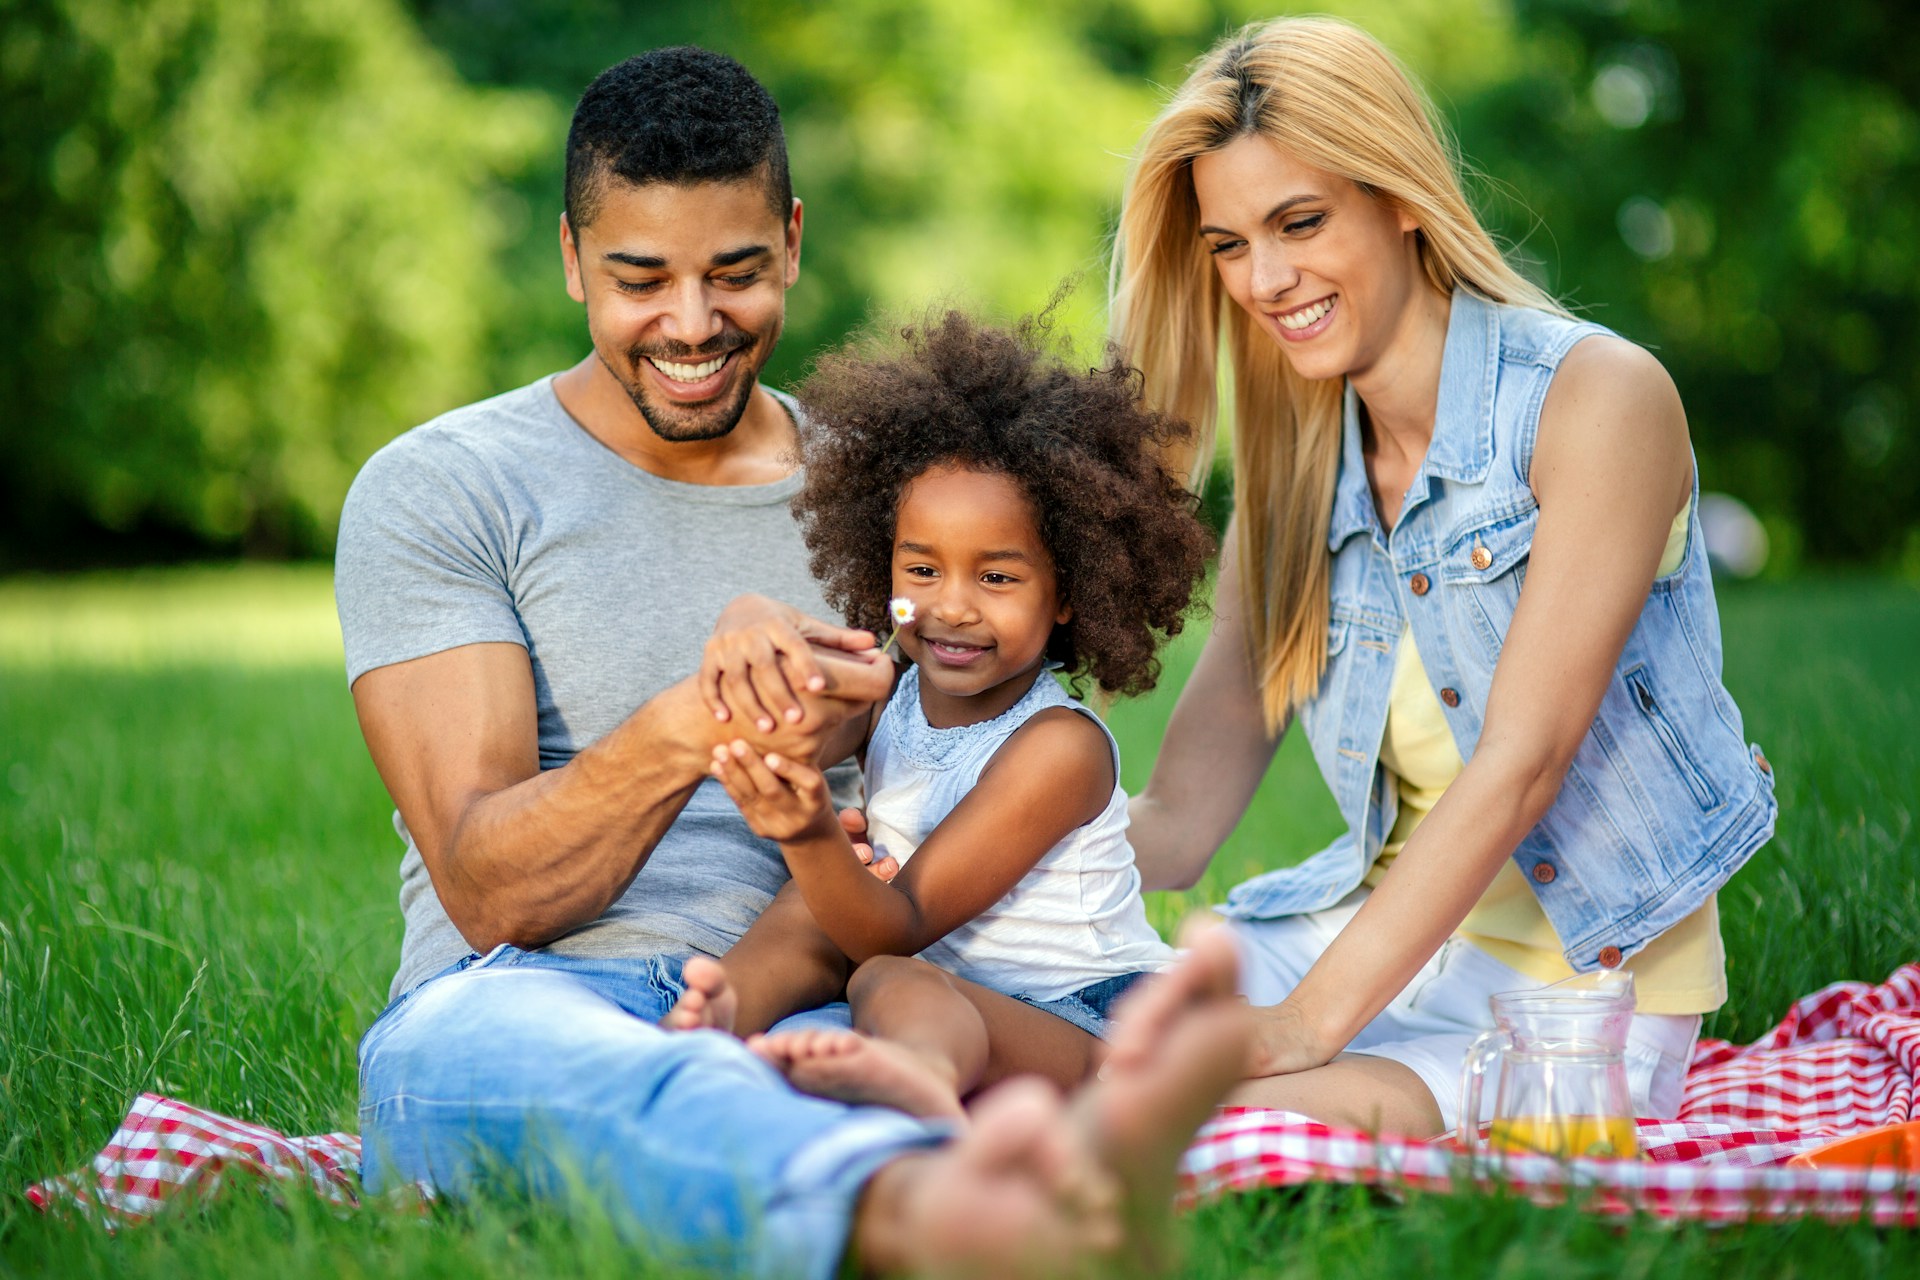 parents and a young child sitting on a picnic blanket in a park